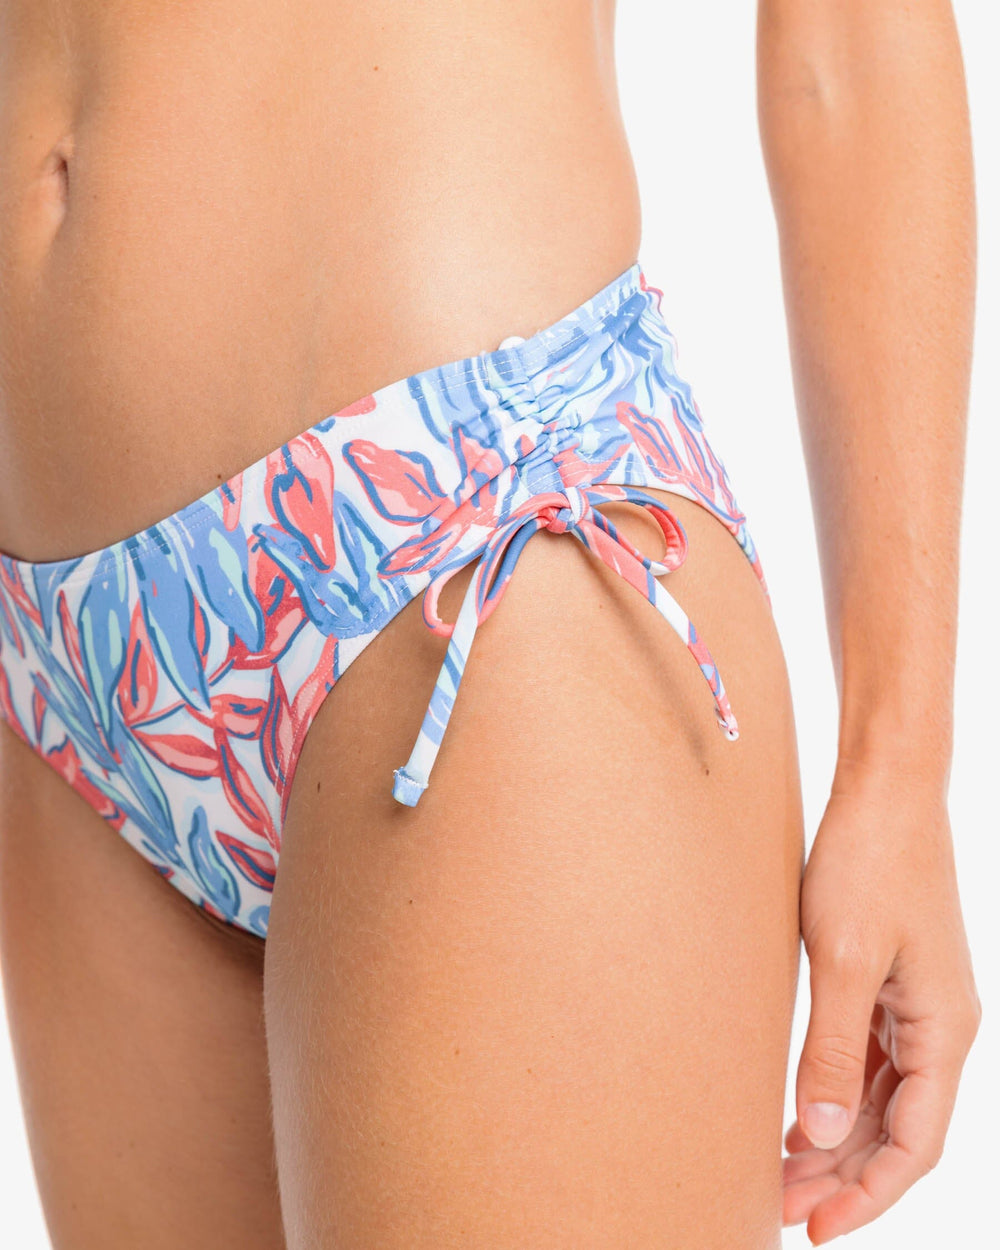 The detail view of the Southern Tide TGIFloral Bikini Bottom by Southern Tide - Sunkist Coral